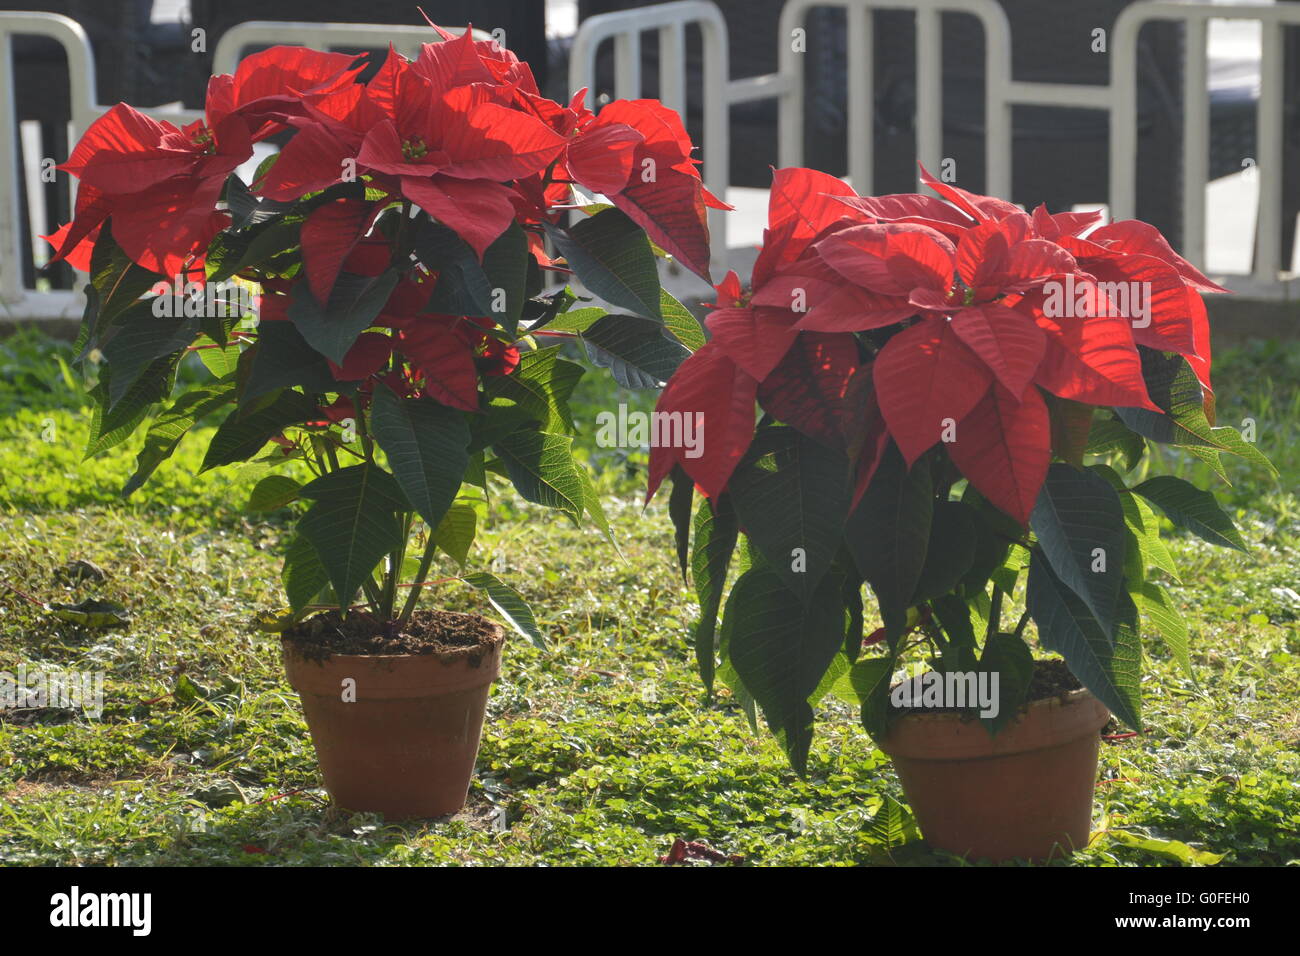 Weihnachtsstern Pflanze High Resolution Stock Photography and Images - Alamy